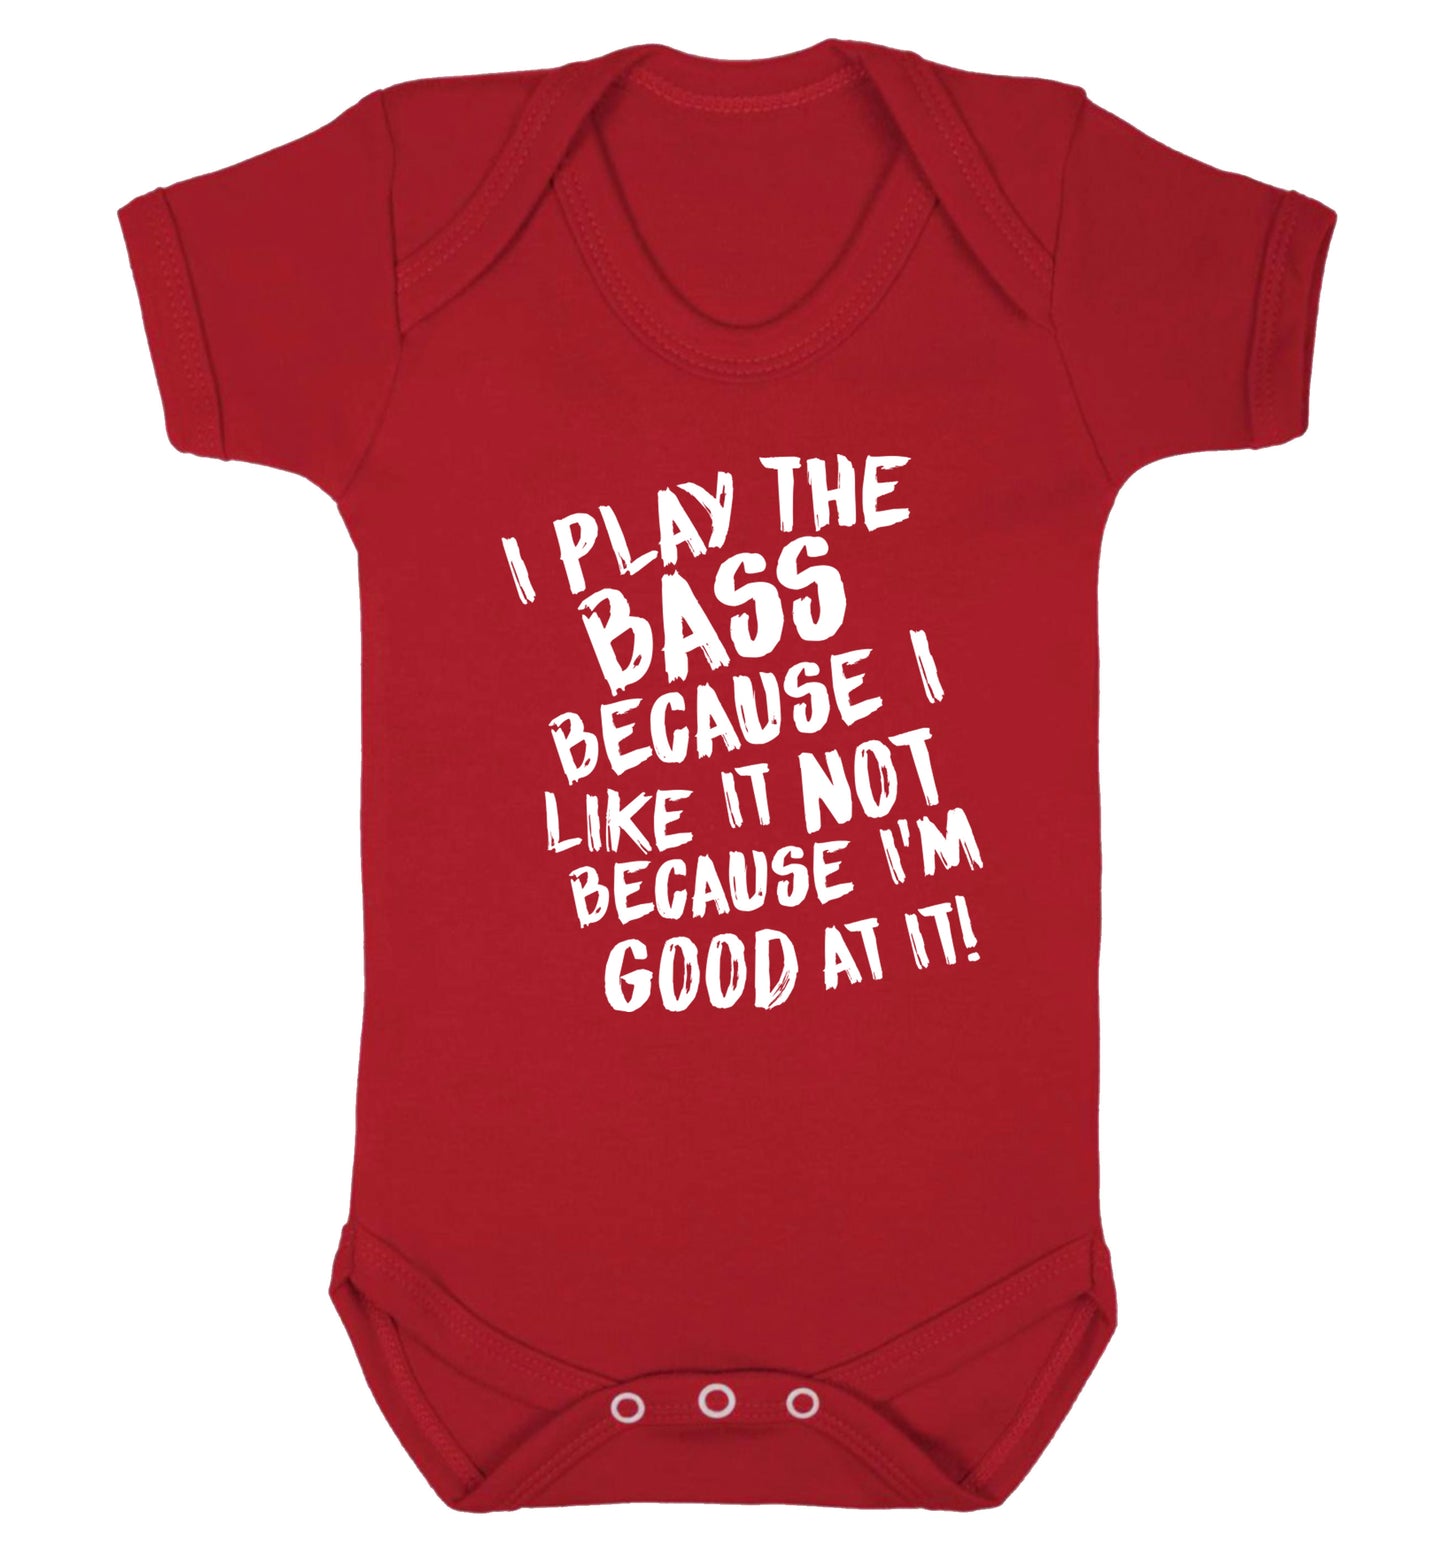 I play the bass because I like it not because I'm good at it Baby Vest red 18-24 months